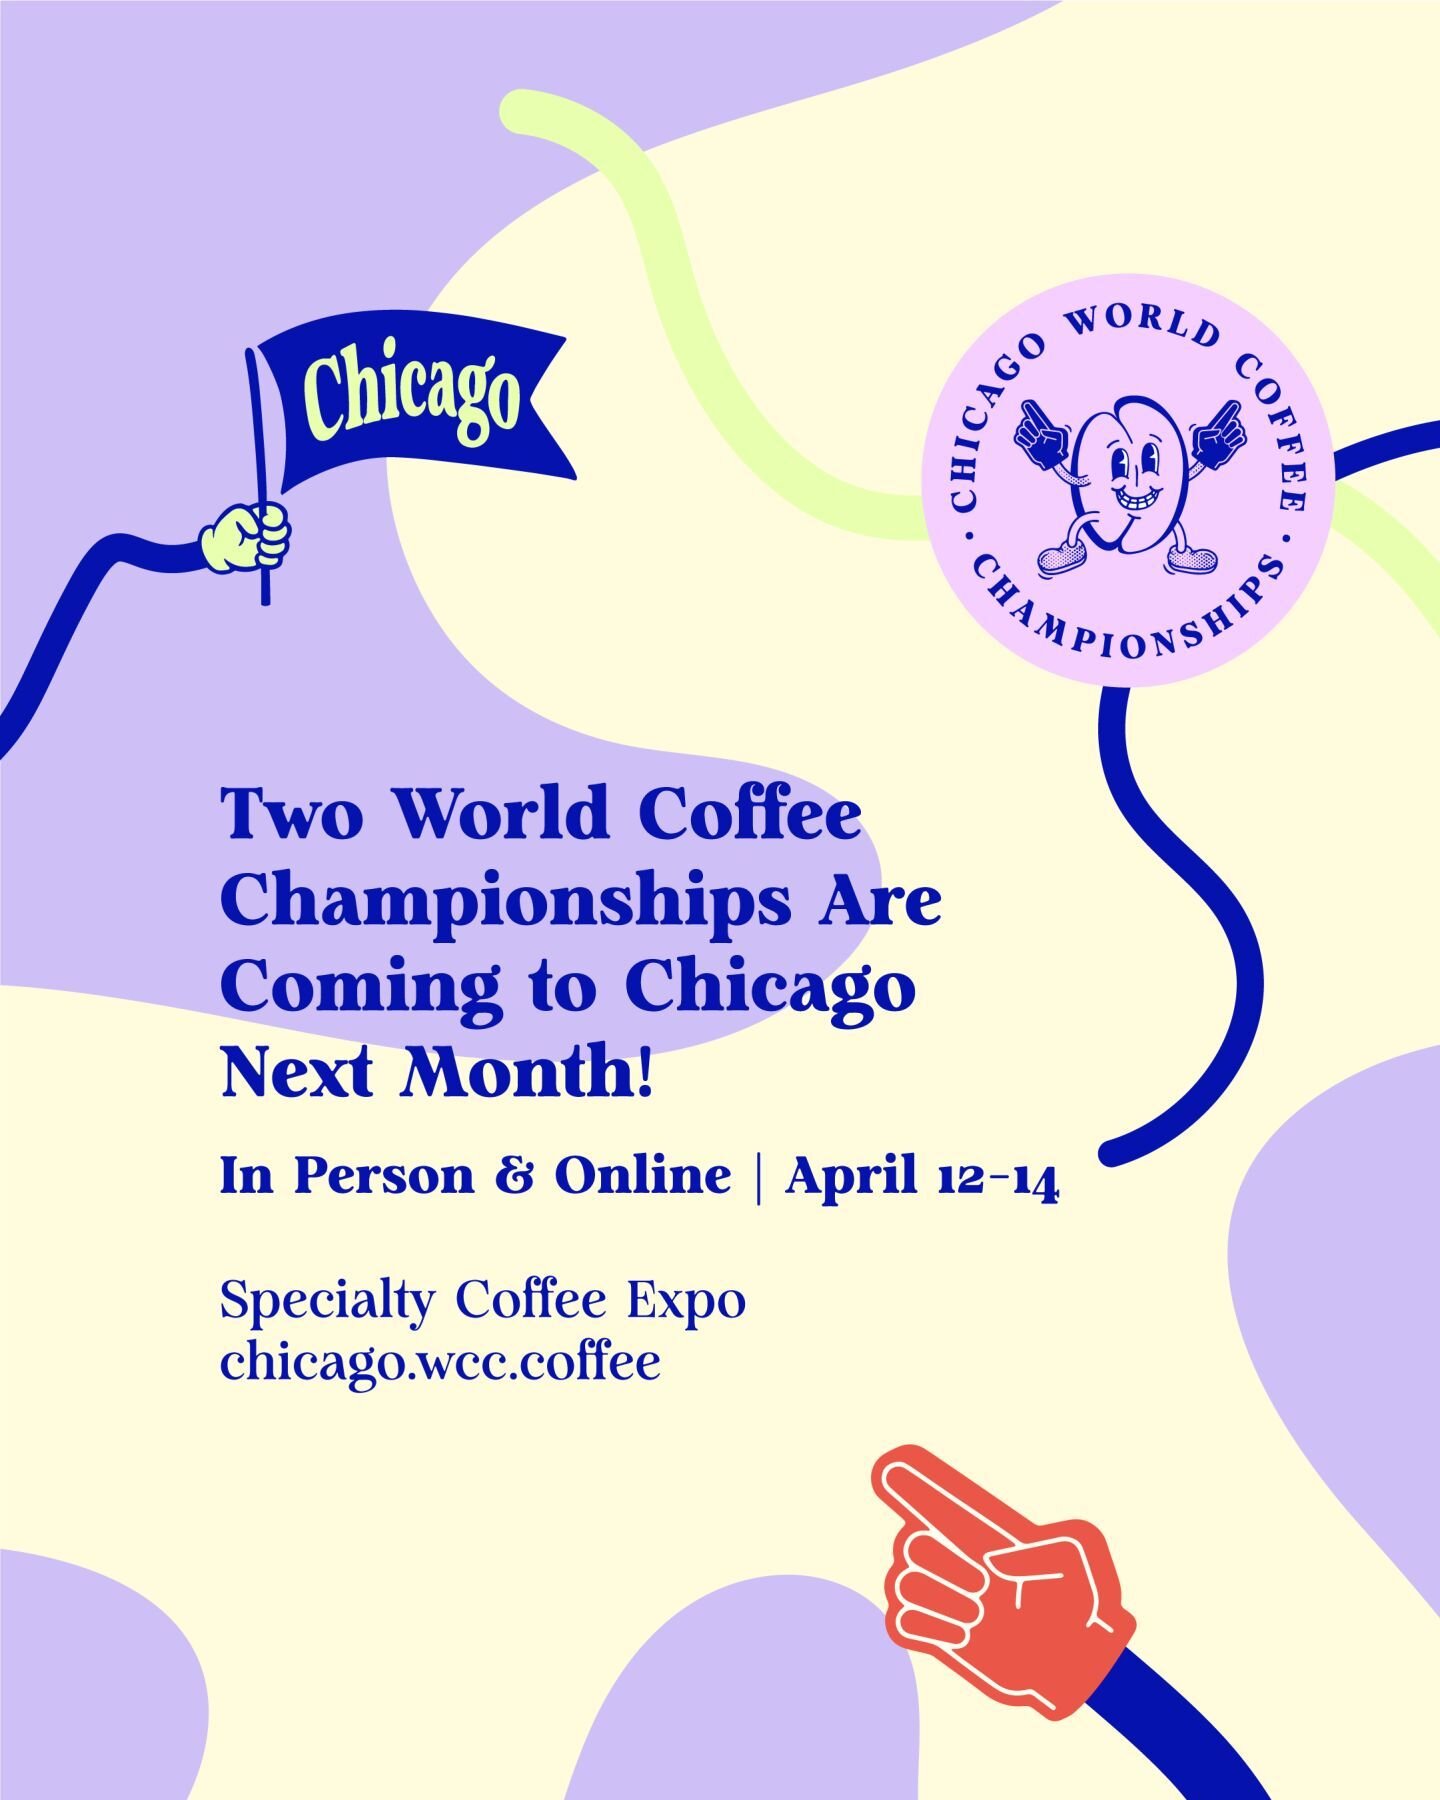 Get excited, the World Coffee Championships are coming to Specialty Coffee Expo next month, with more than 70 national competitors and champions expected to participate in the World Brewers Cup &amp; World Cup Tasters Championships. Cheer along in pe